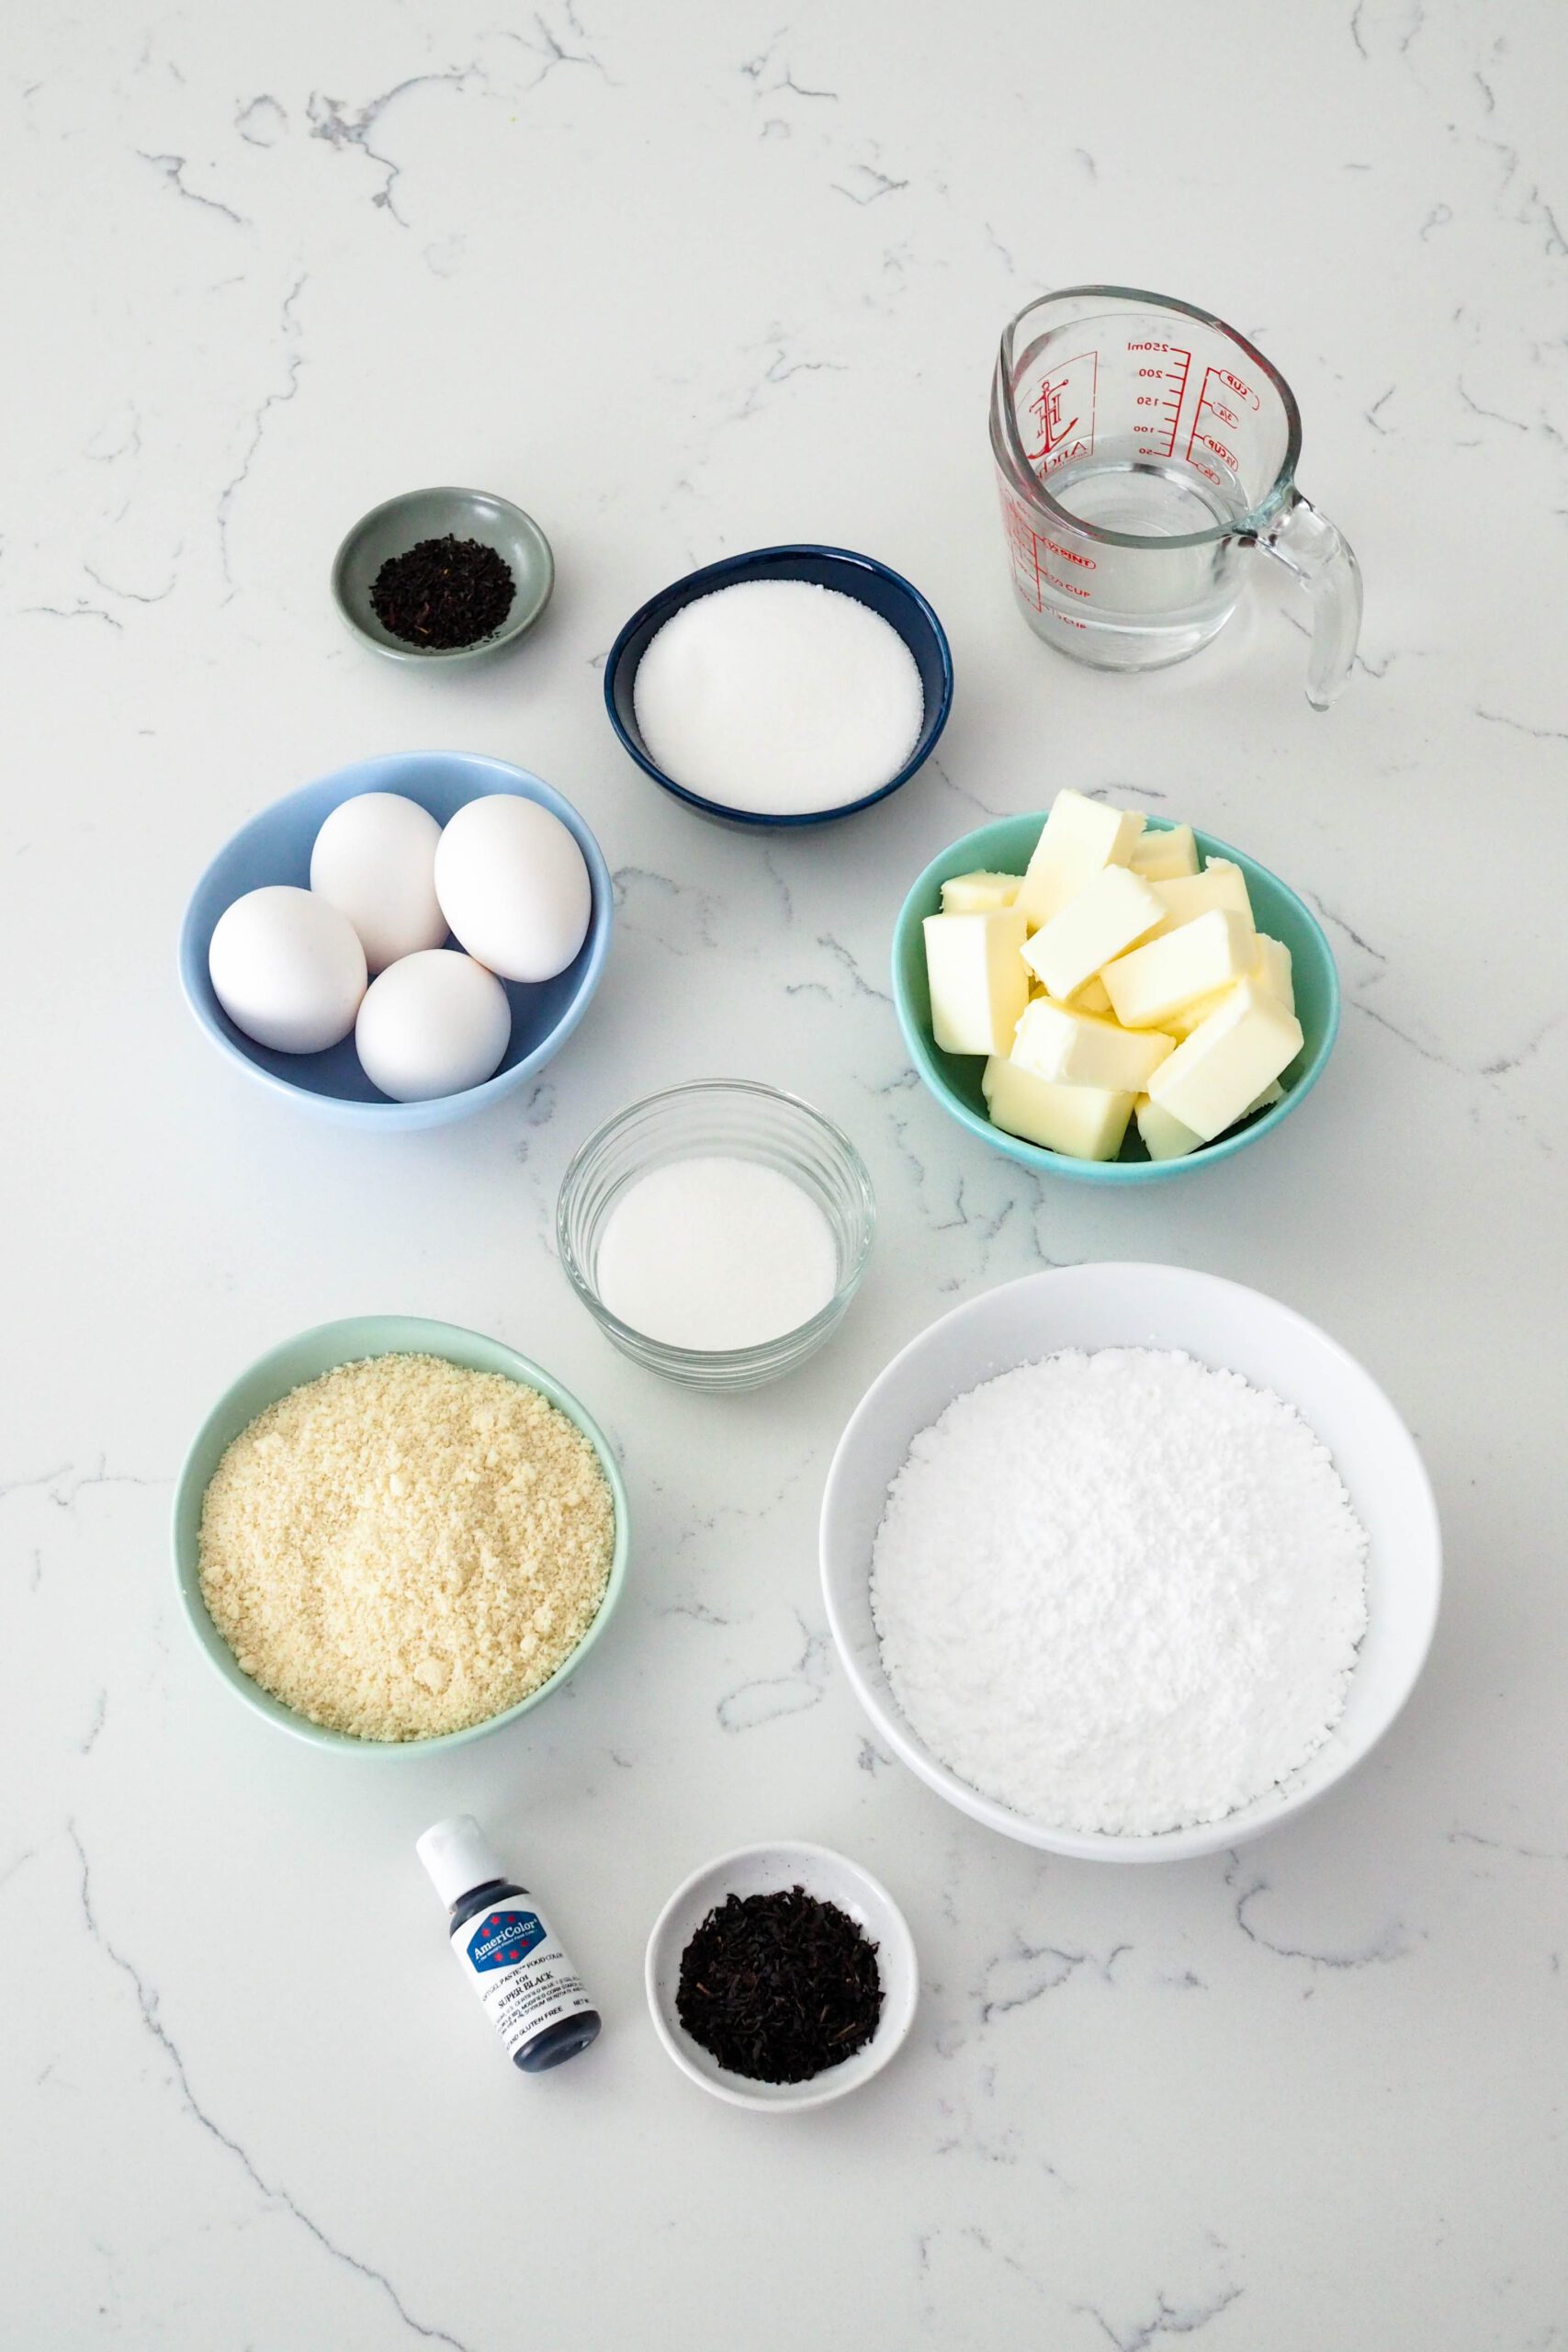 Ingredients for Earl Grey macarons on a quartz counter.